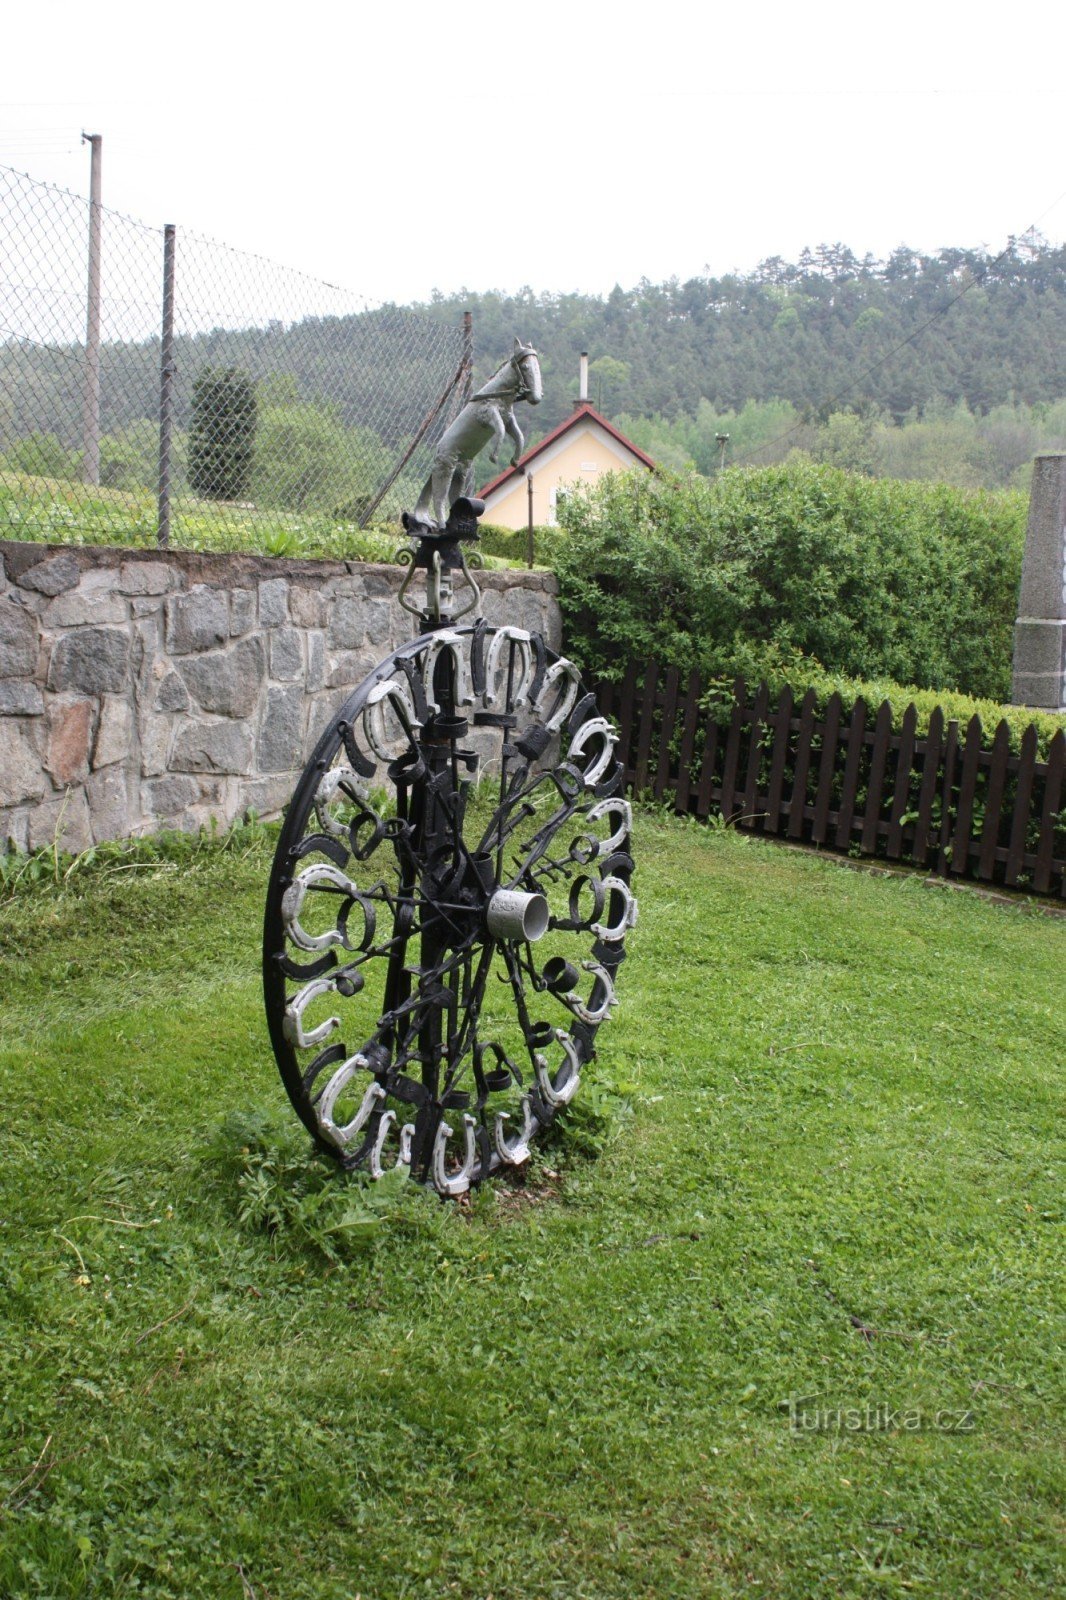 A tribute to blacksmithing and farrier craft from František Uchytil in Miřetice